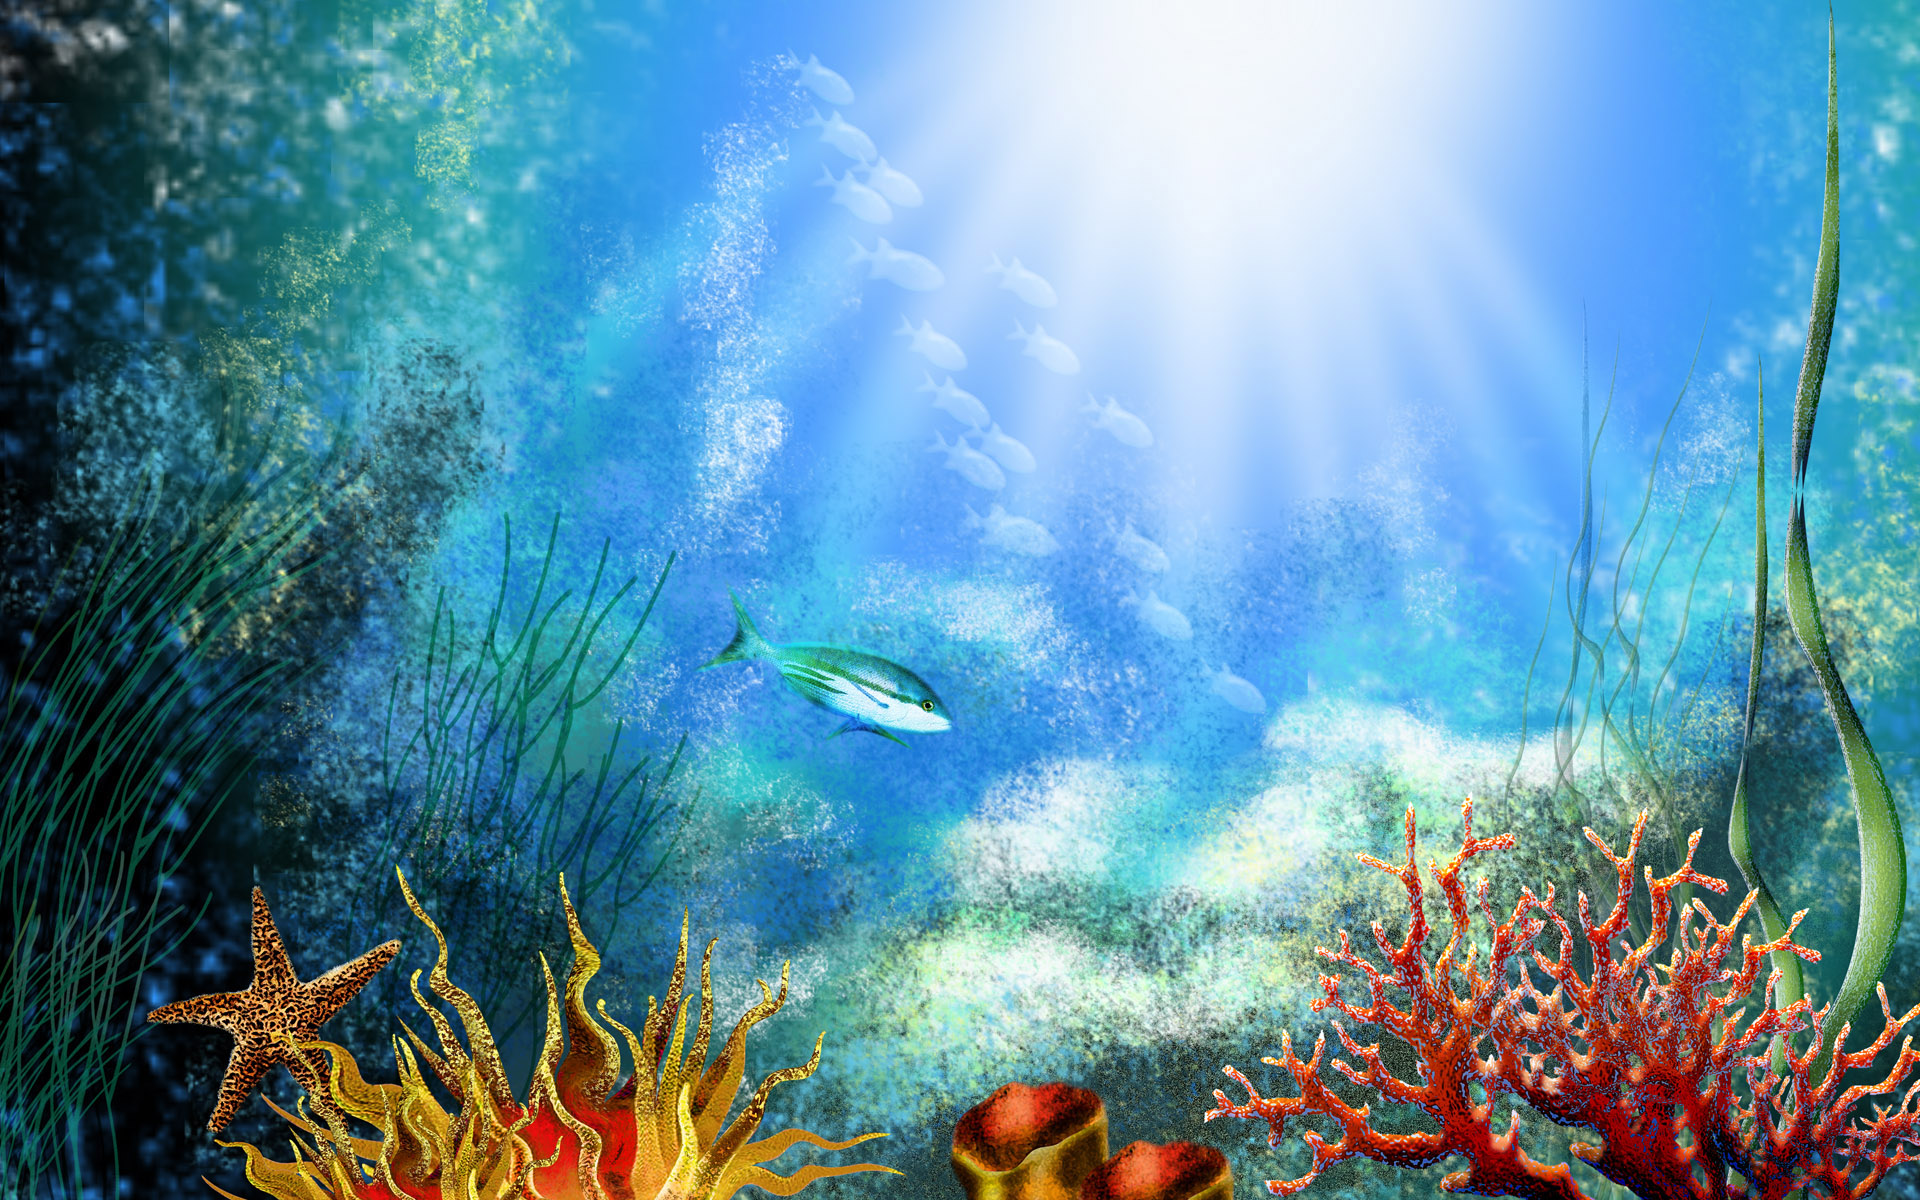  Feel free to use and share these tropical aquarium background images